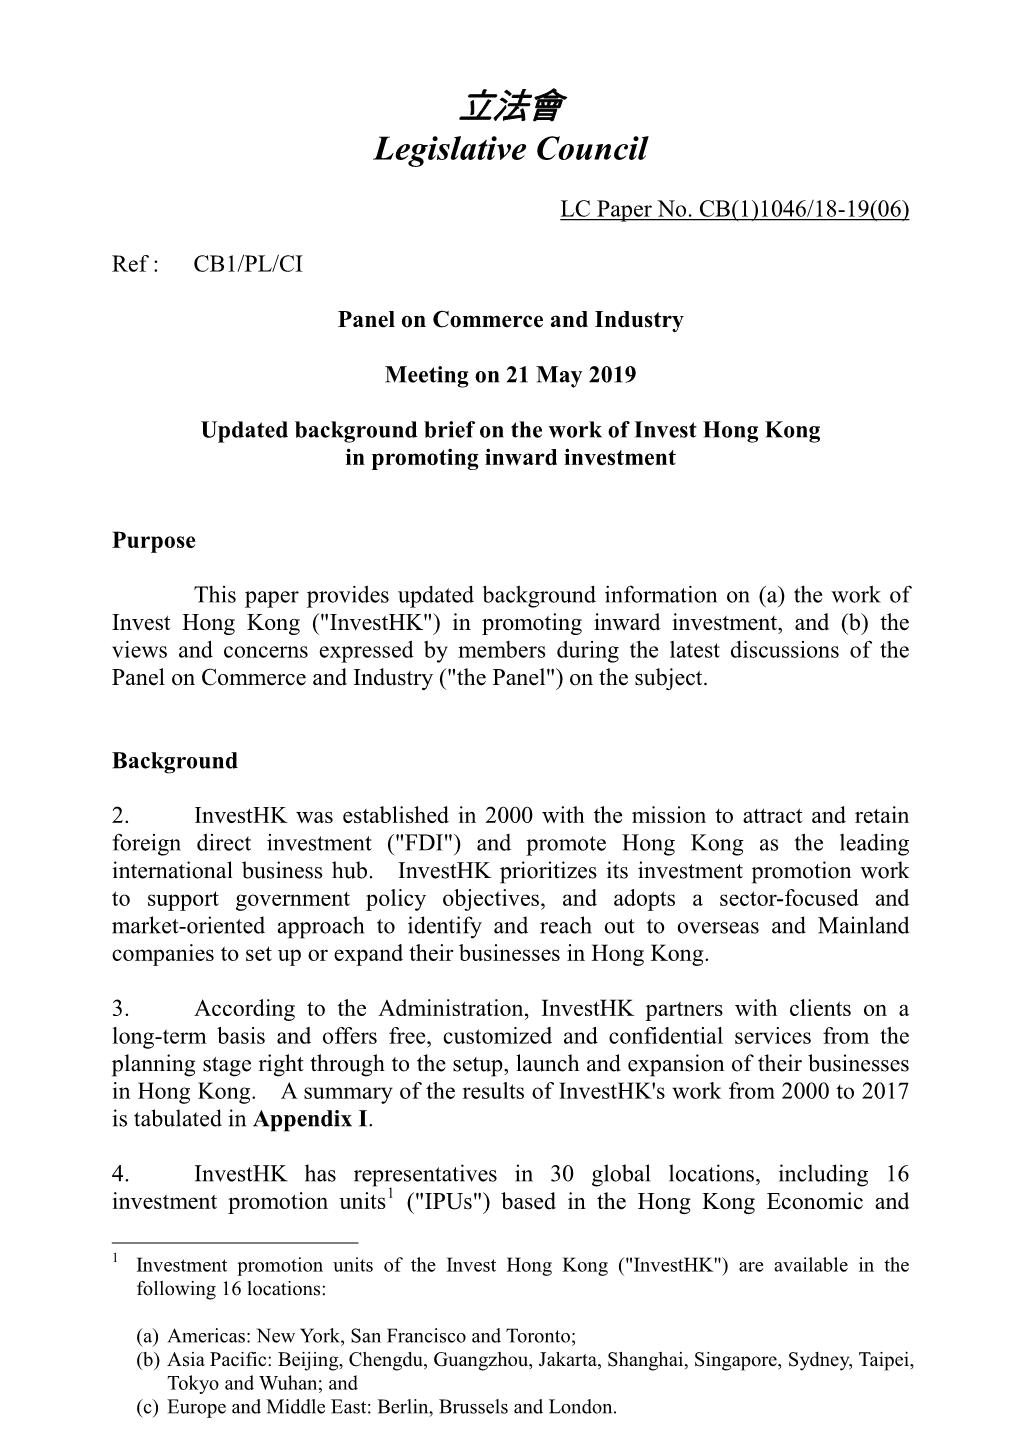 Paper on the Work of Invest Hong Kong in Promoting Inward Investment Prepared by the Legislative